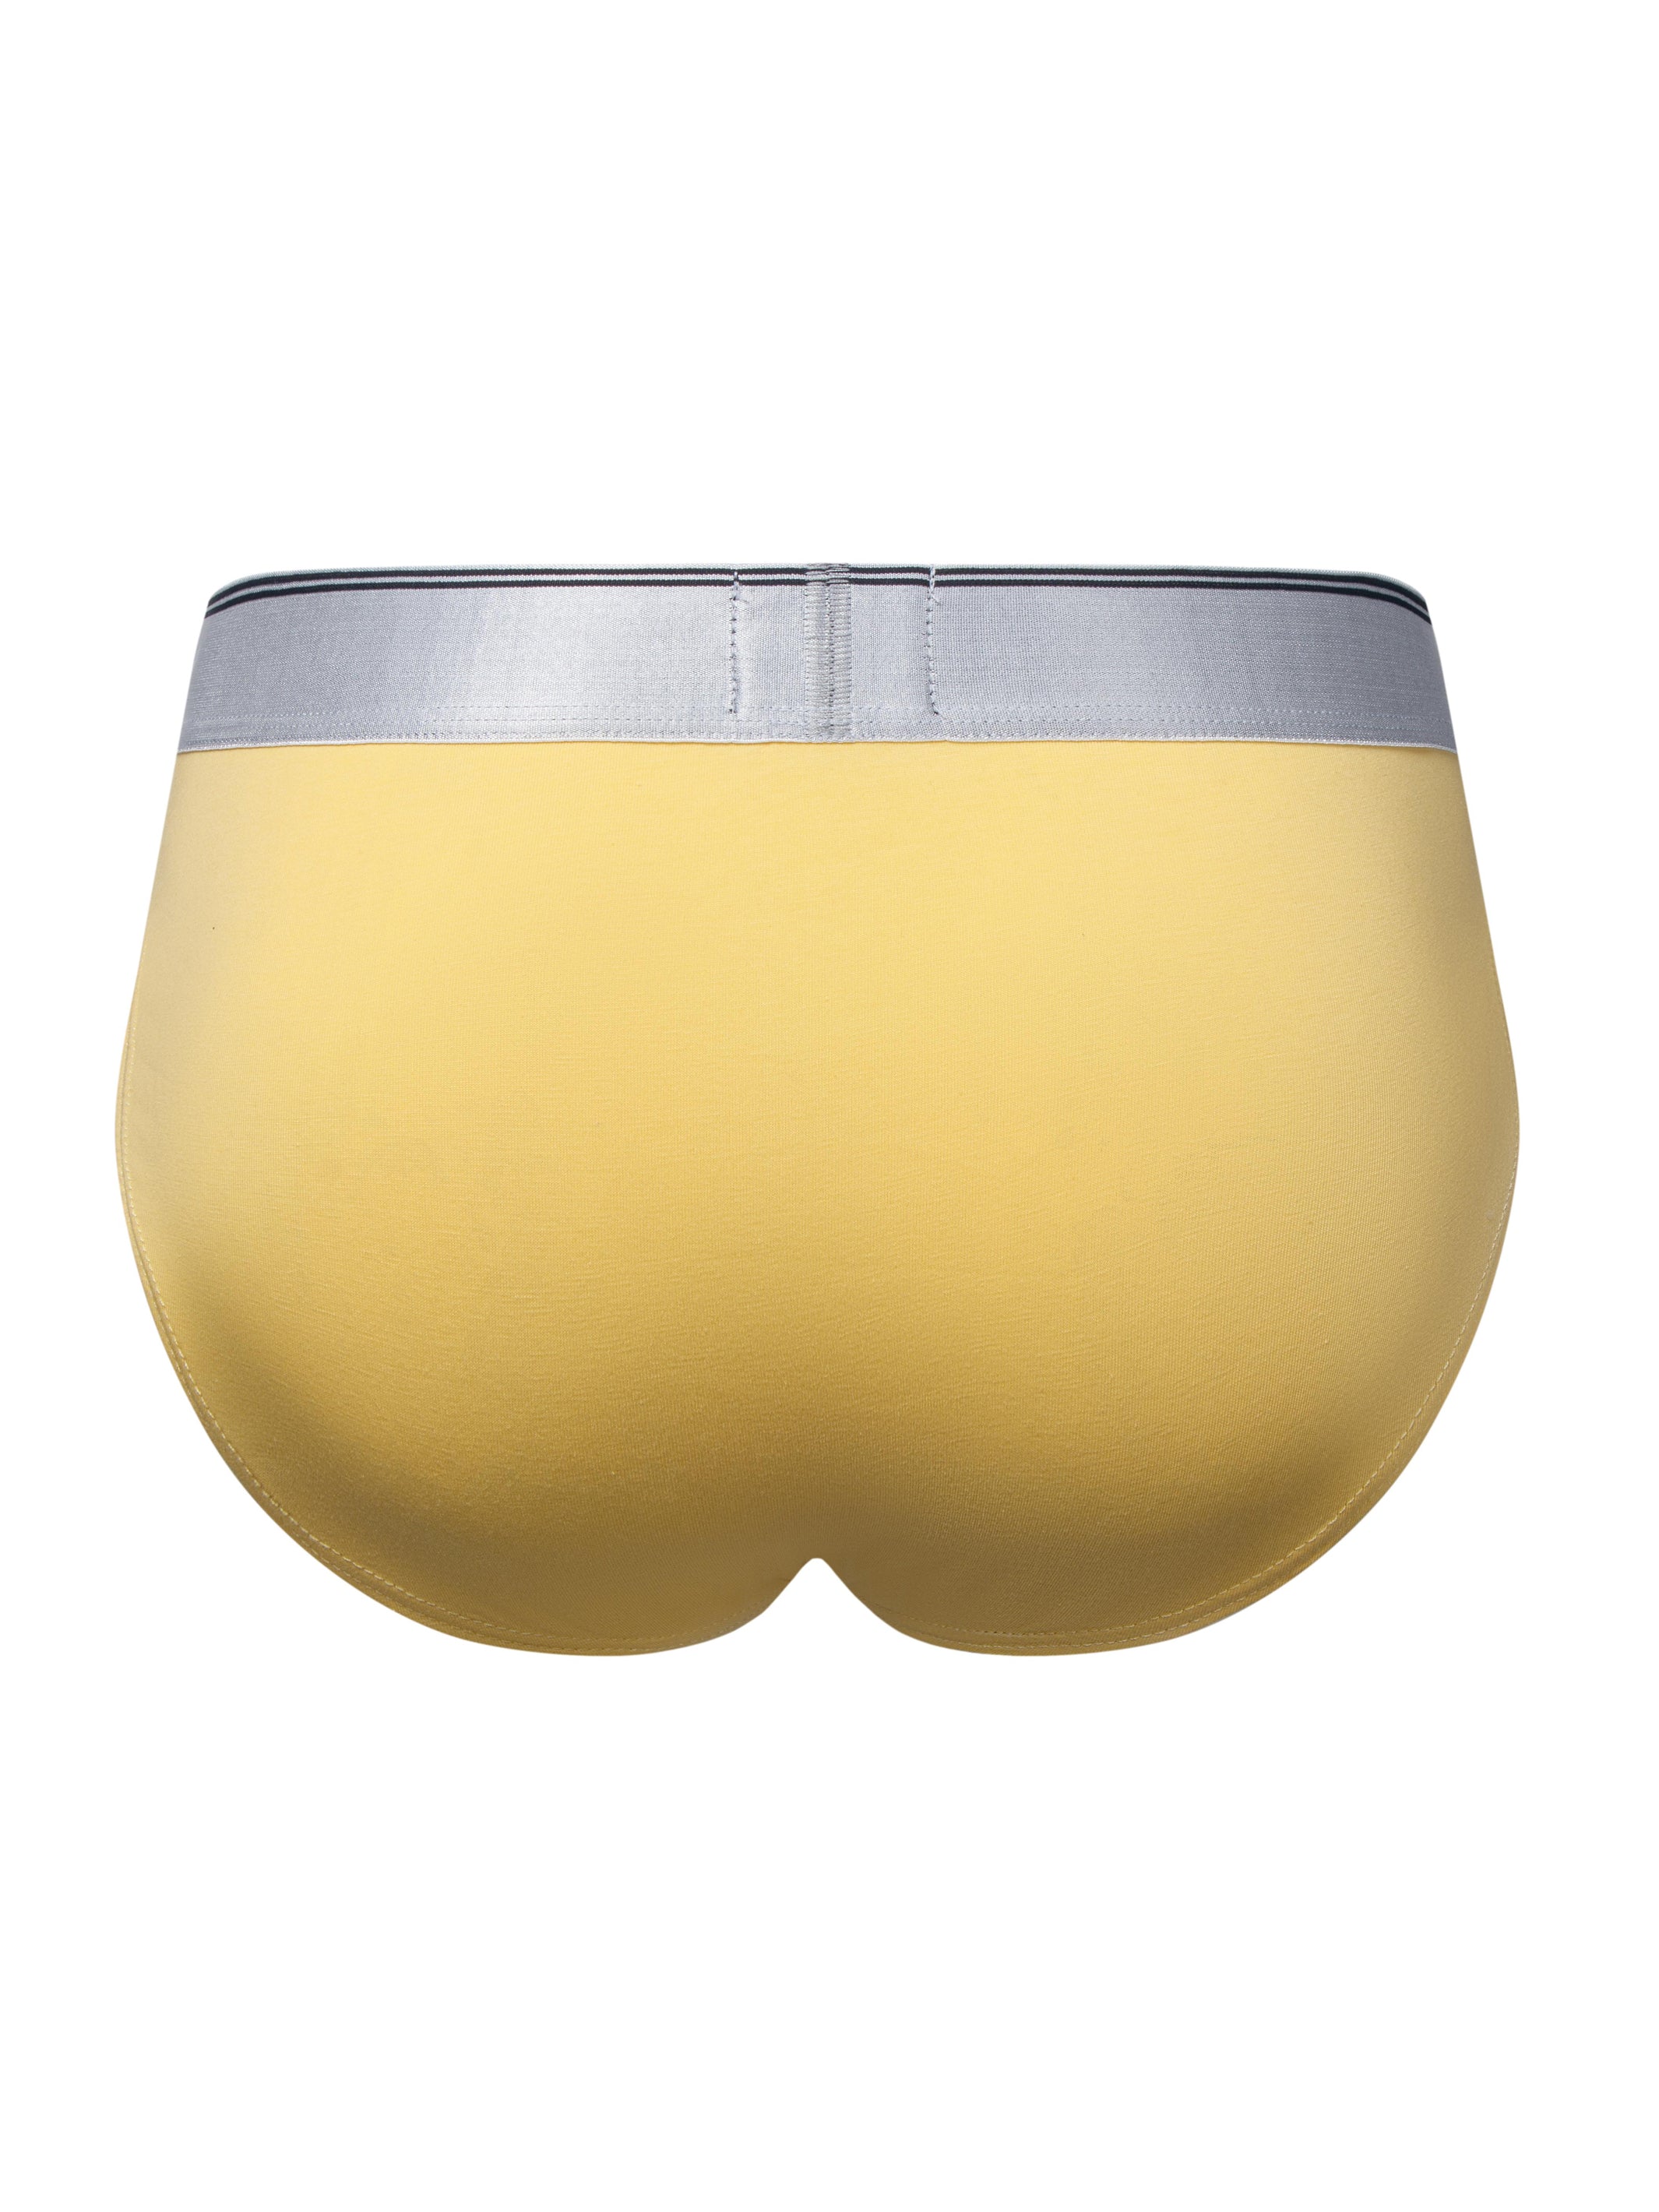 A product photo taken from the back of a pair of yellow Y2K Briefs.